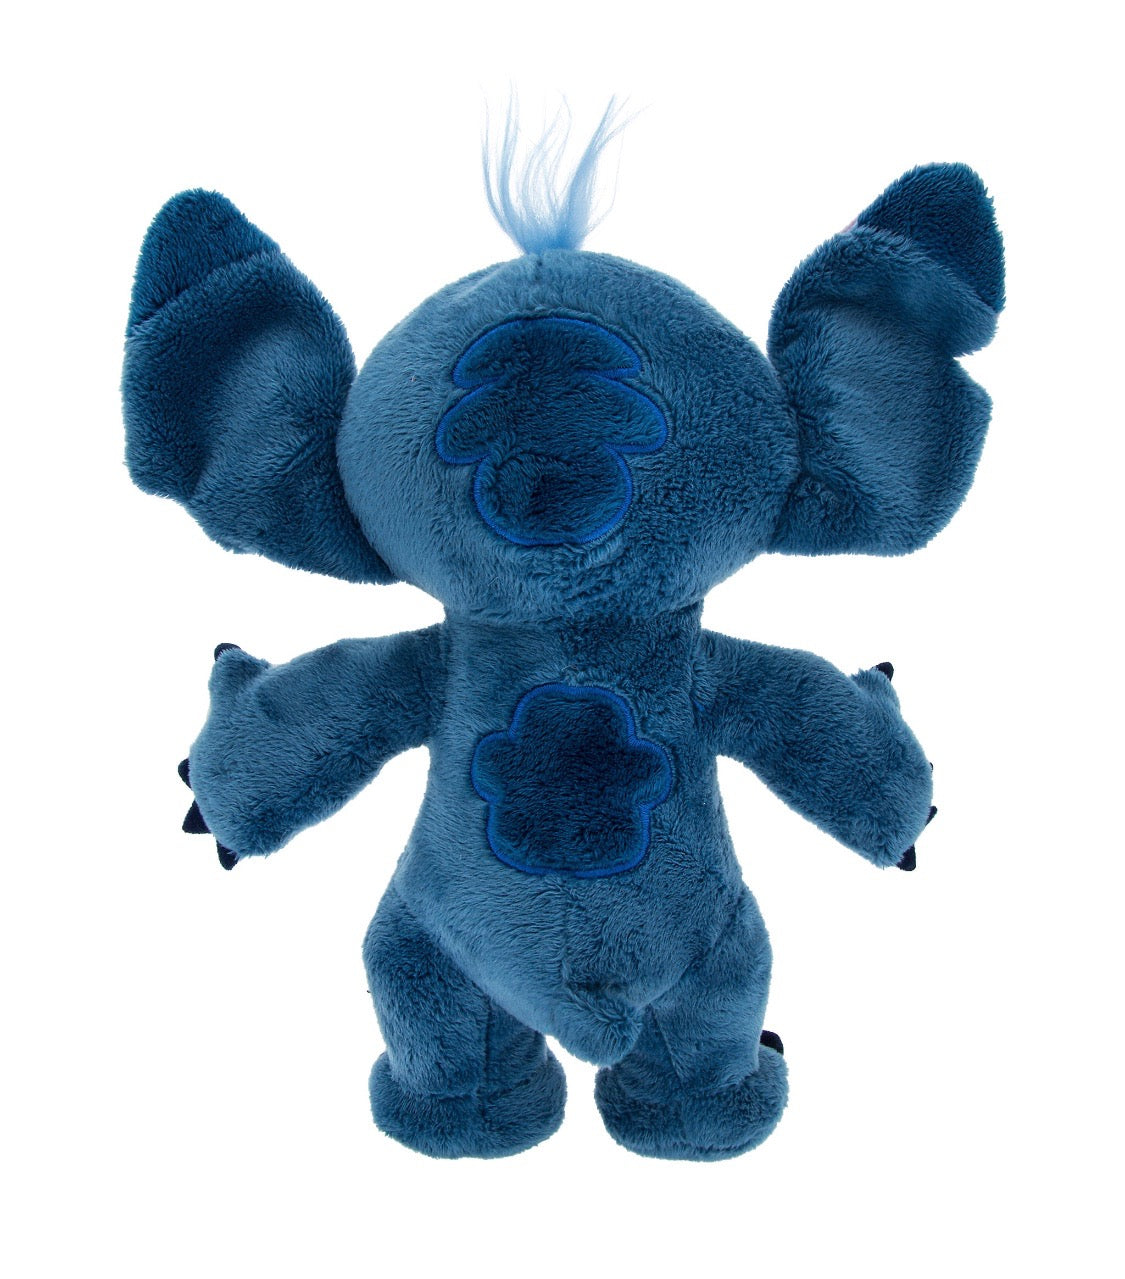 Disney Parks Stitch Standing 9 inc Plush New with Tag